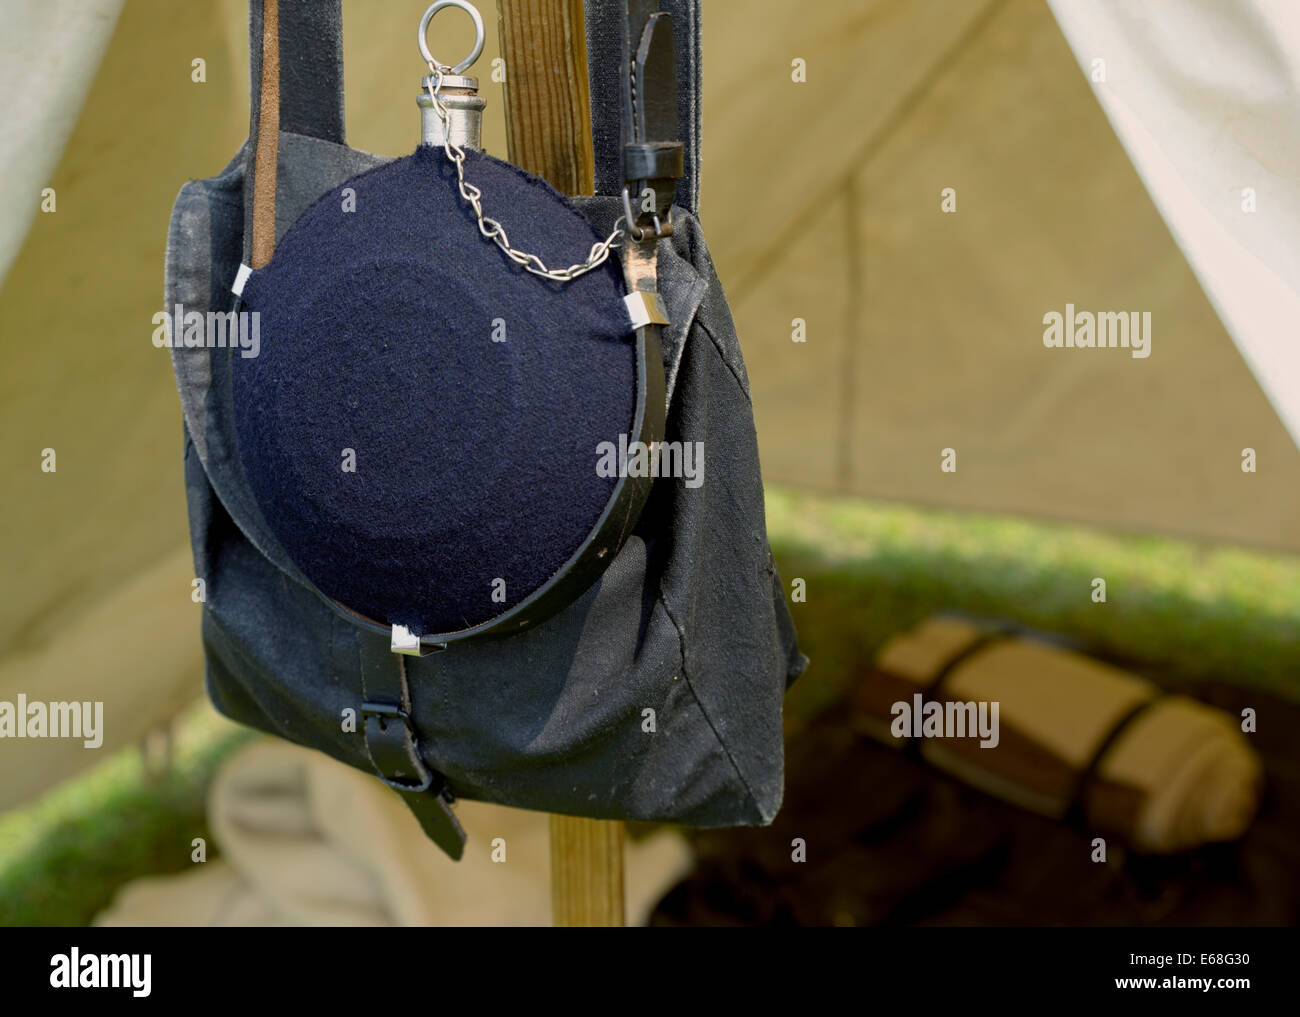 A blue Union Army canteen hangs in a Civil War re-enactor's encampment during a living history event. Stock Photo